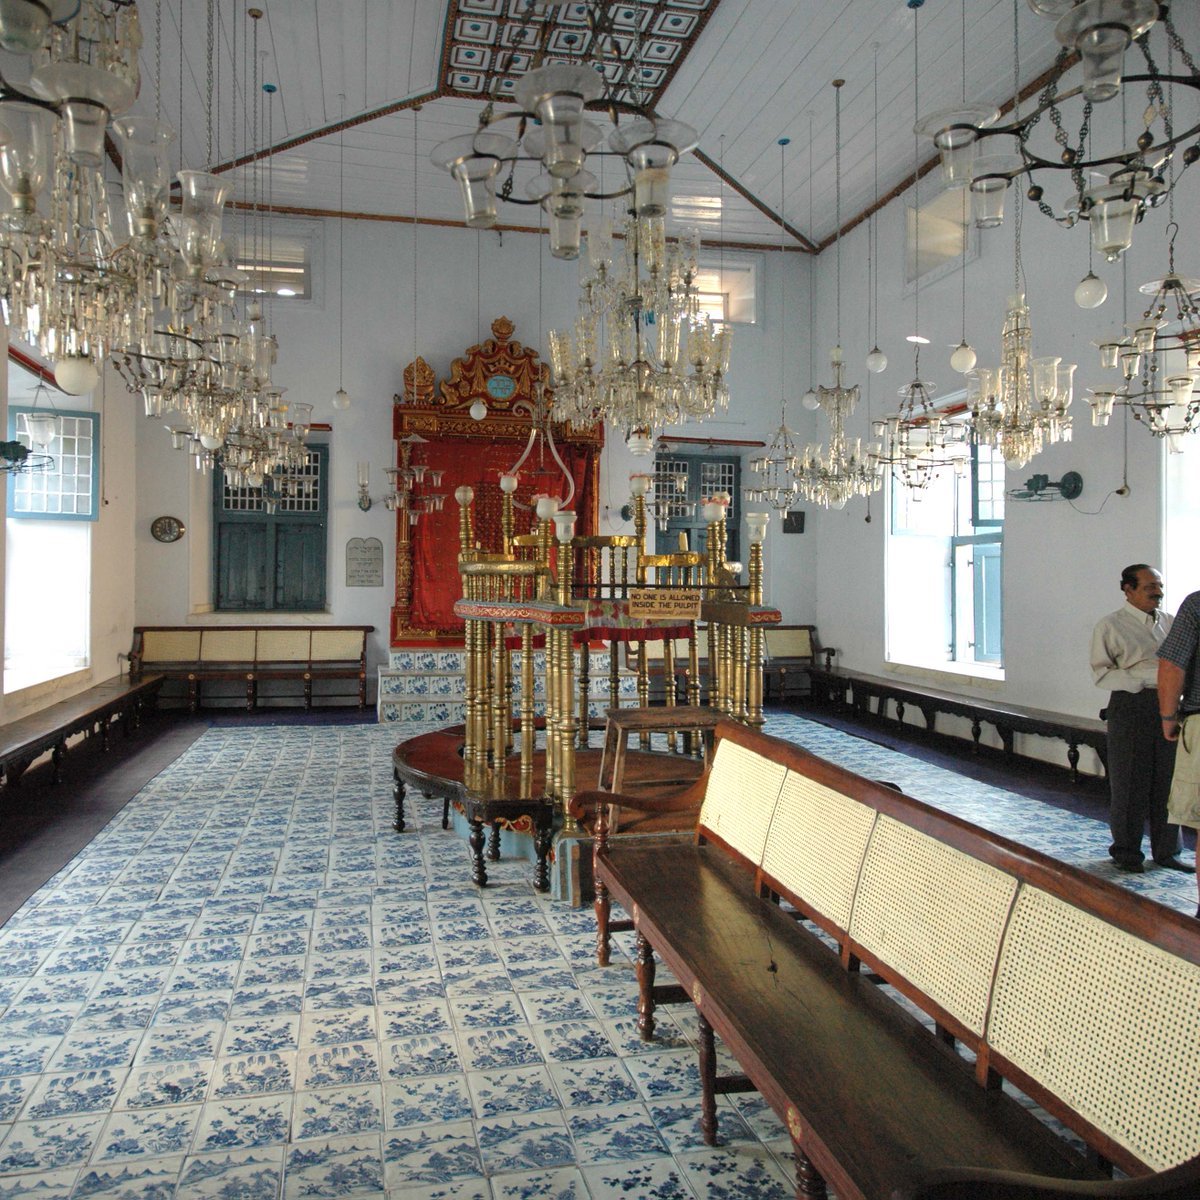 Mattancherry Synagogue was built by Paradesi Jews (Sephardi immigrants to India) in Kochi, Kerala in 1568.It is the oldest synagogue in the Commonwealth.